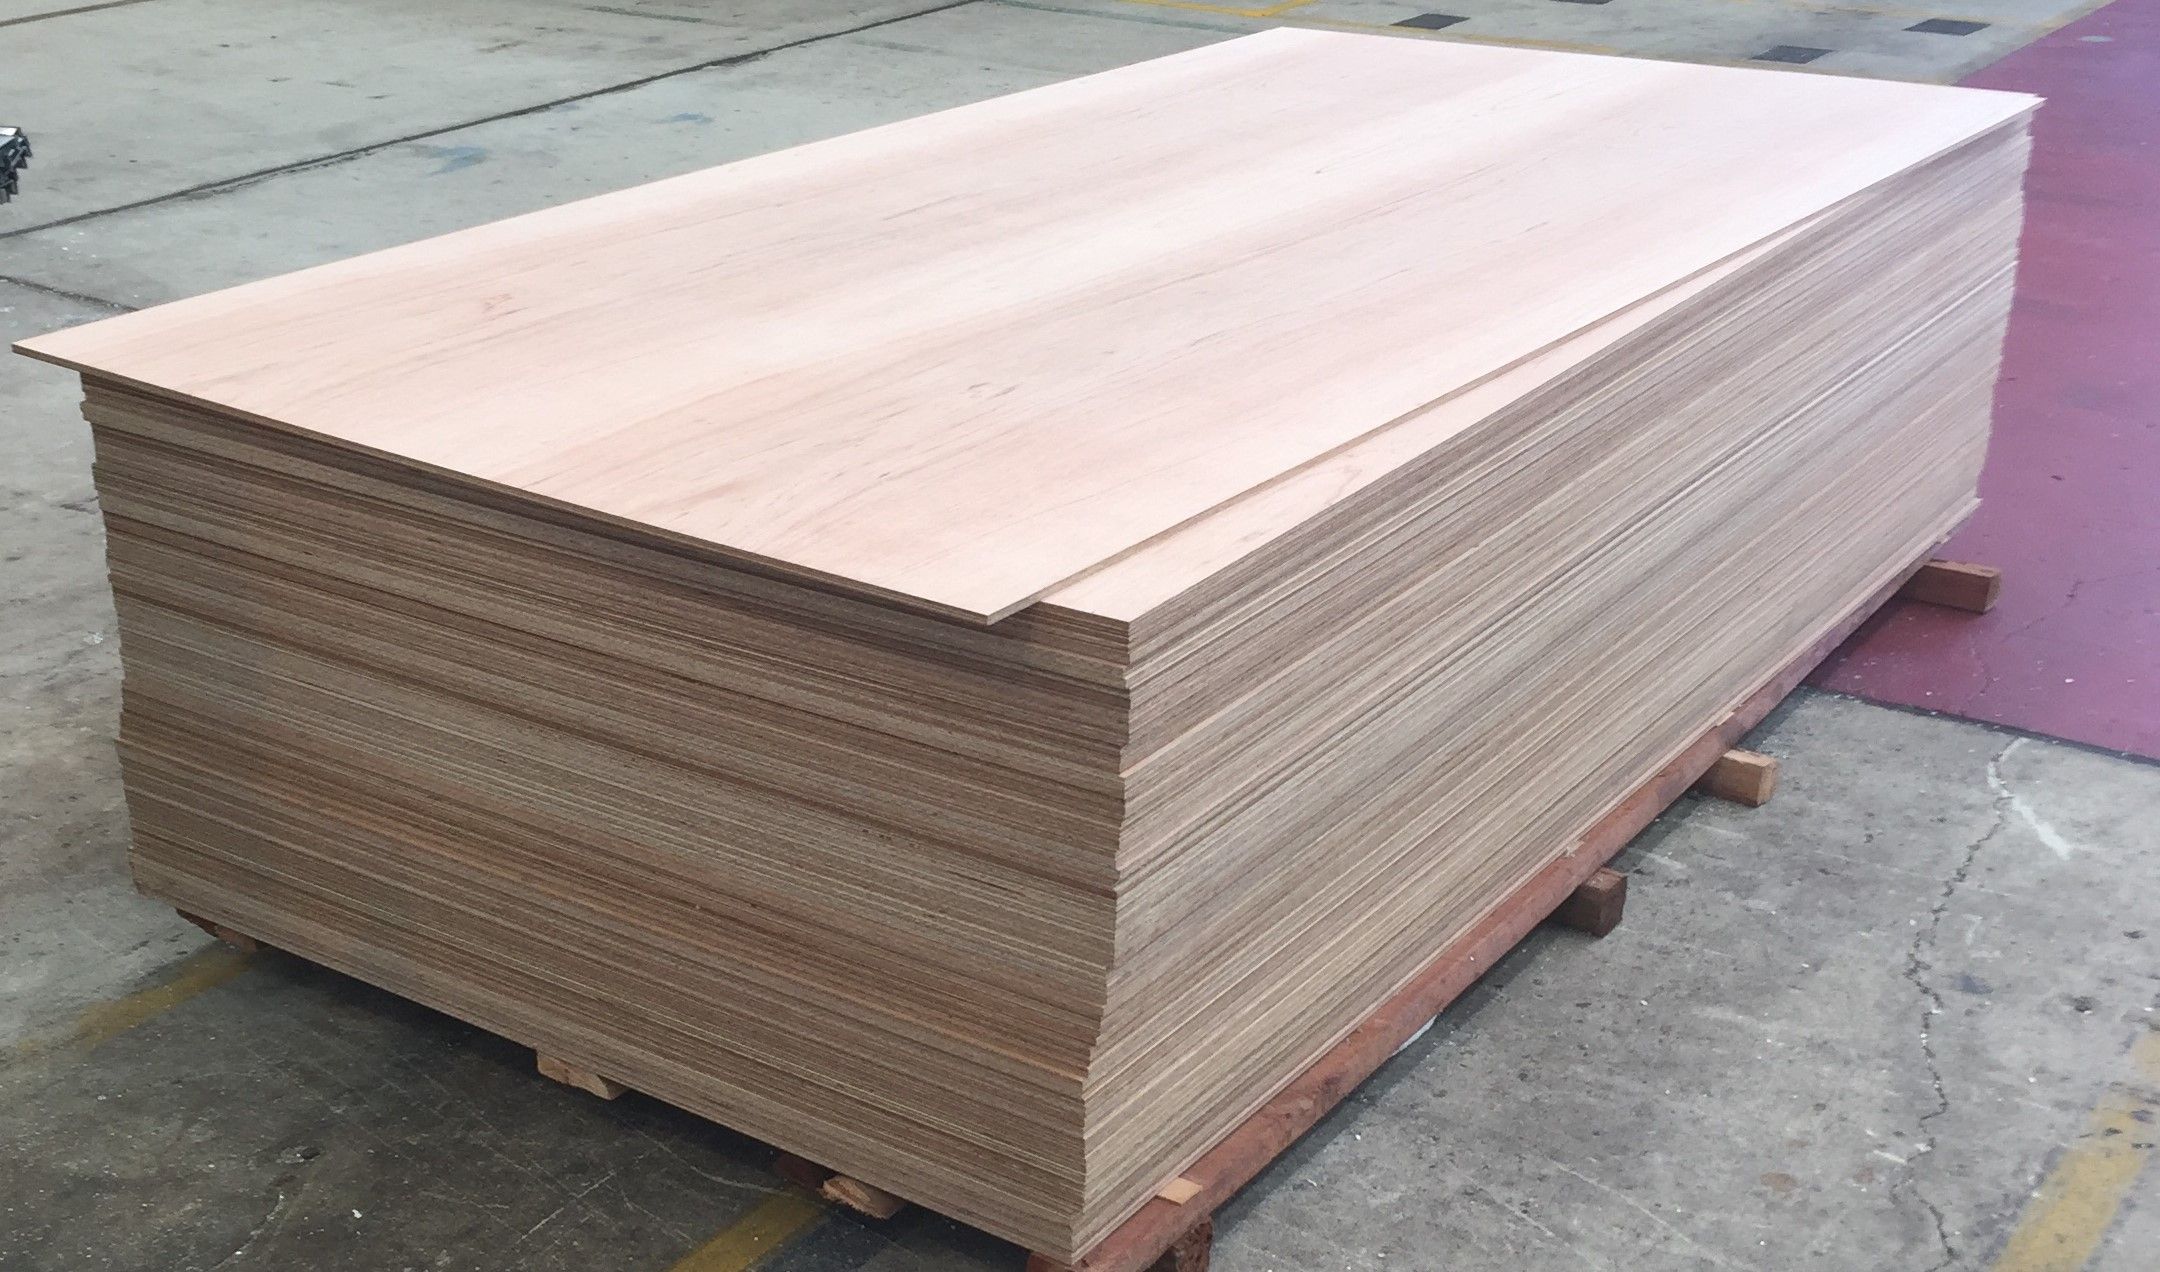 mining sector plywood, plywood brisbane, plywood flooring,  Non-Structural CD Plywood, Structural Plywood, Exterior Hardwood Plywood, Polyester Faced Plywood, and Film Faced Non-Structural Plywood.